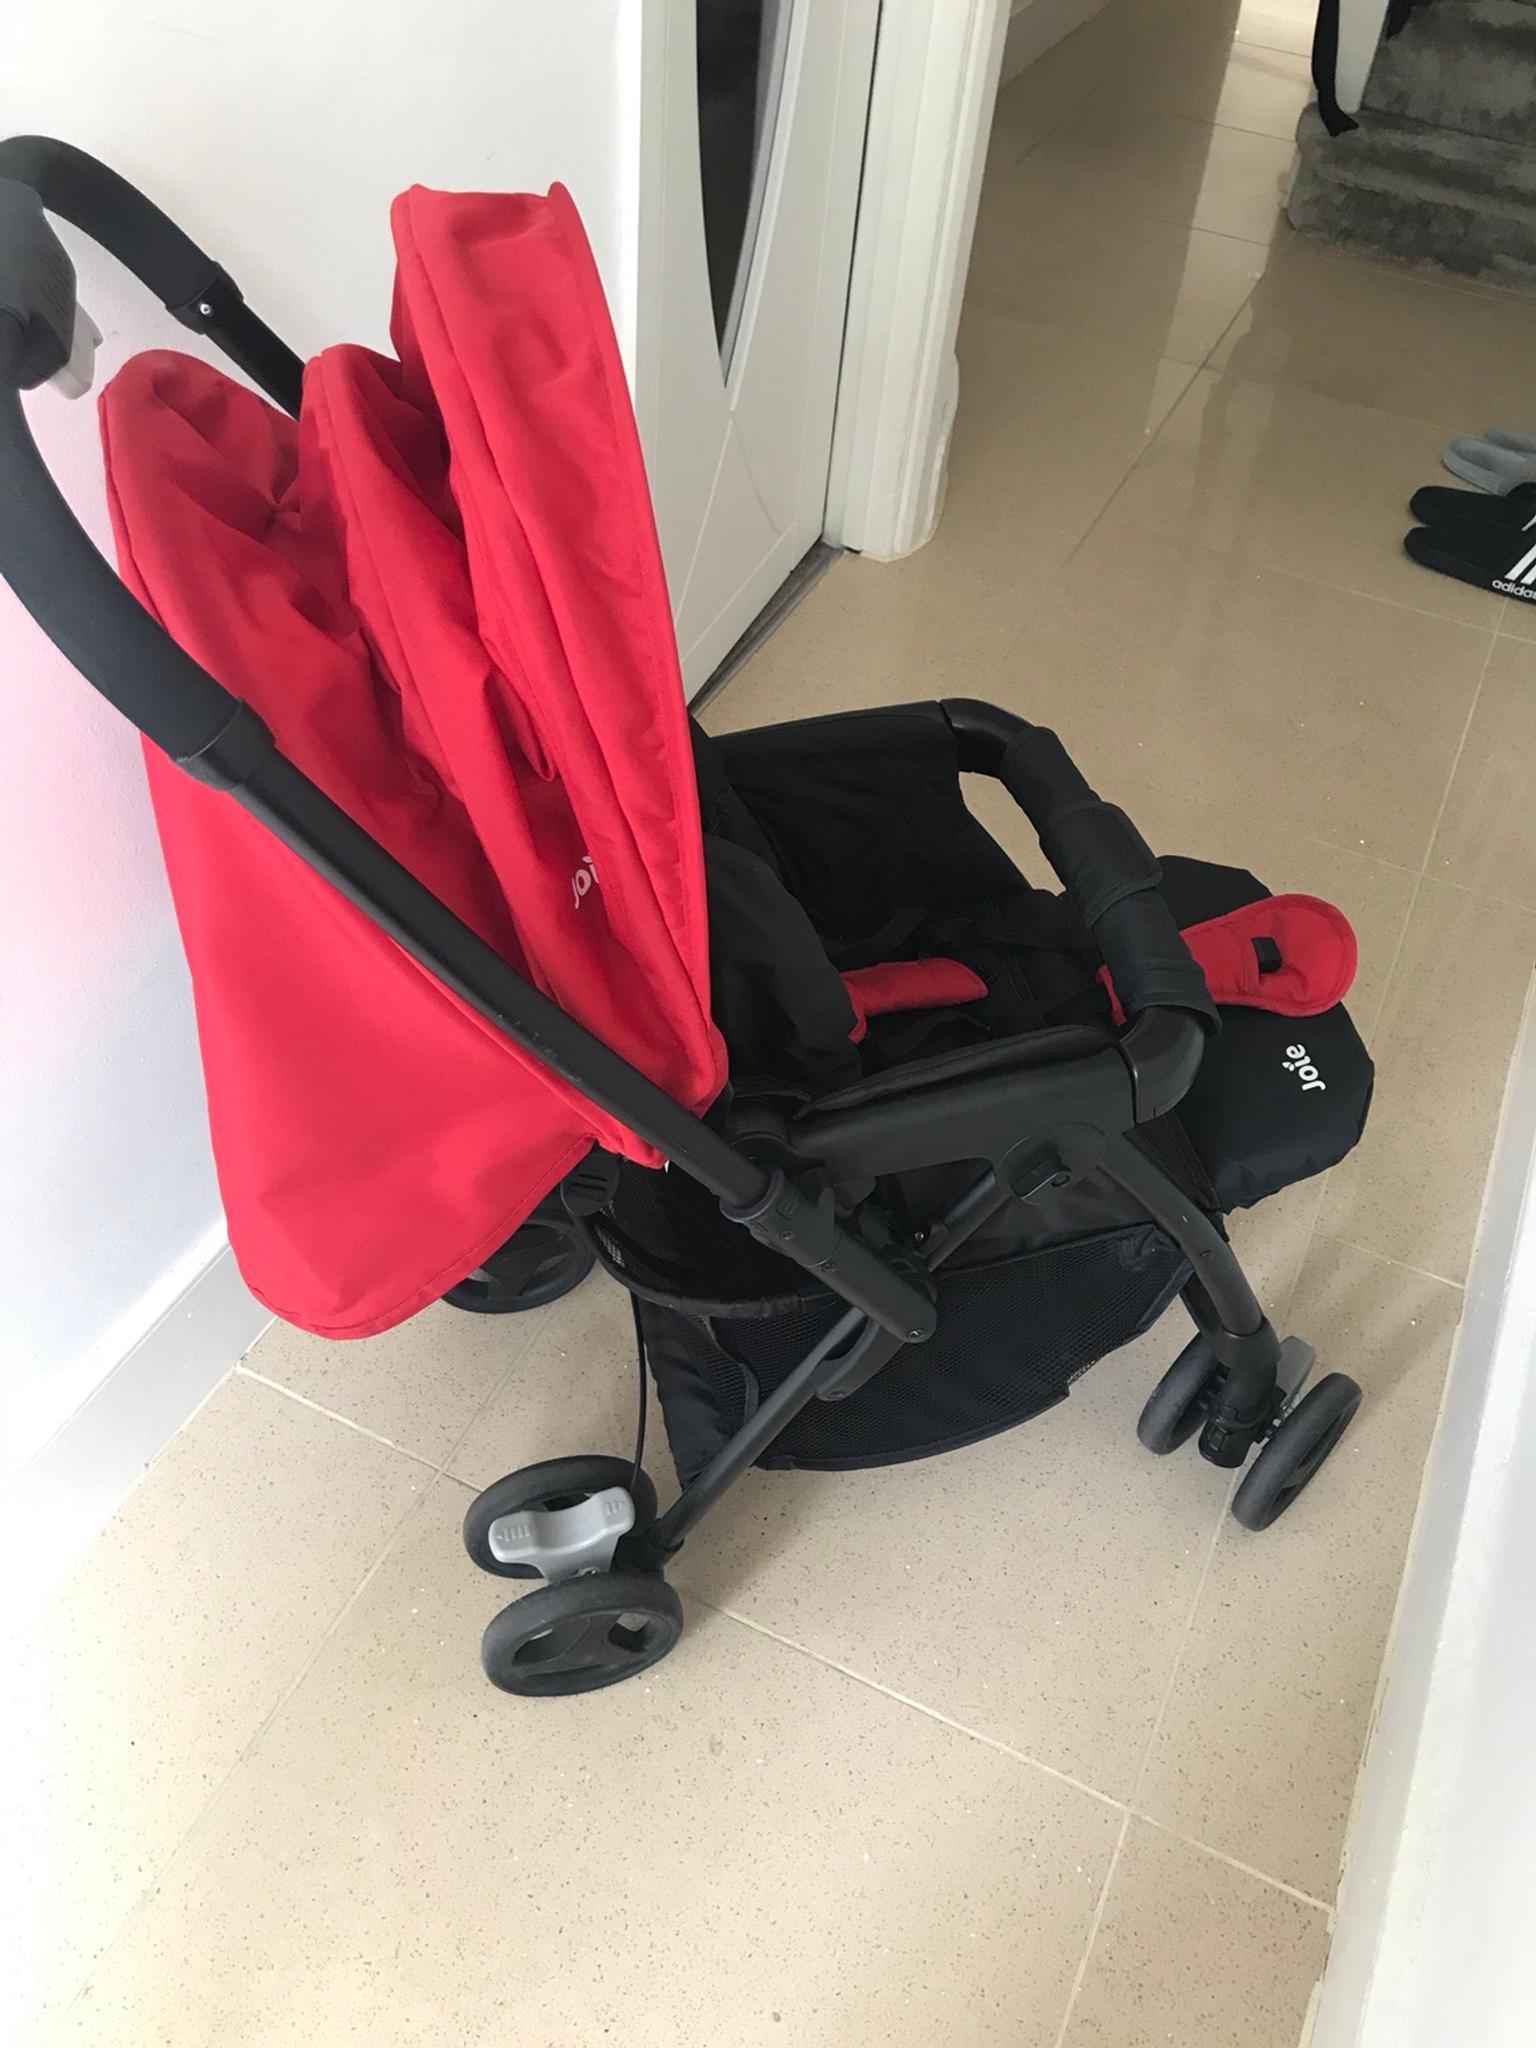 joie stroller red and black